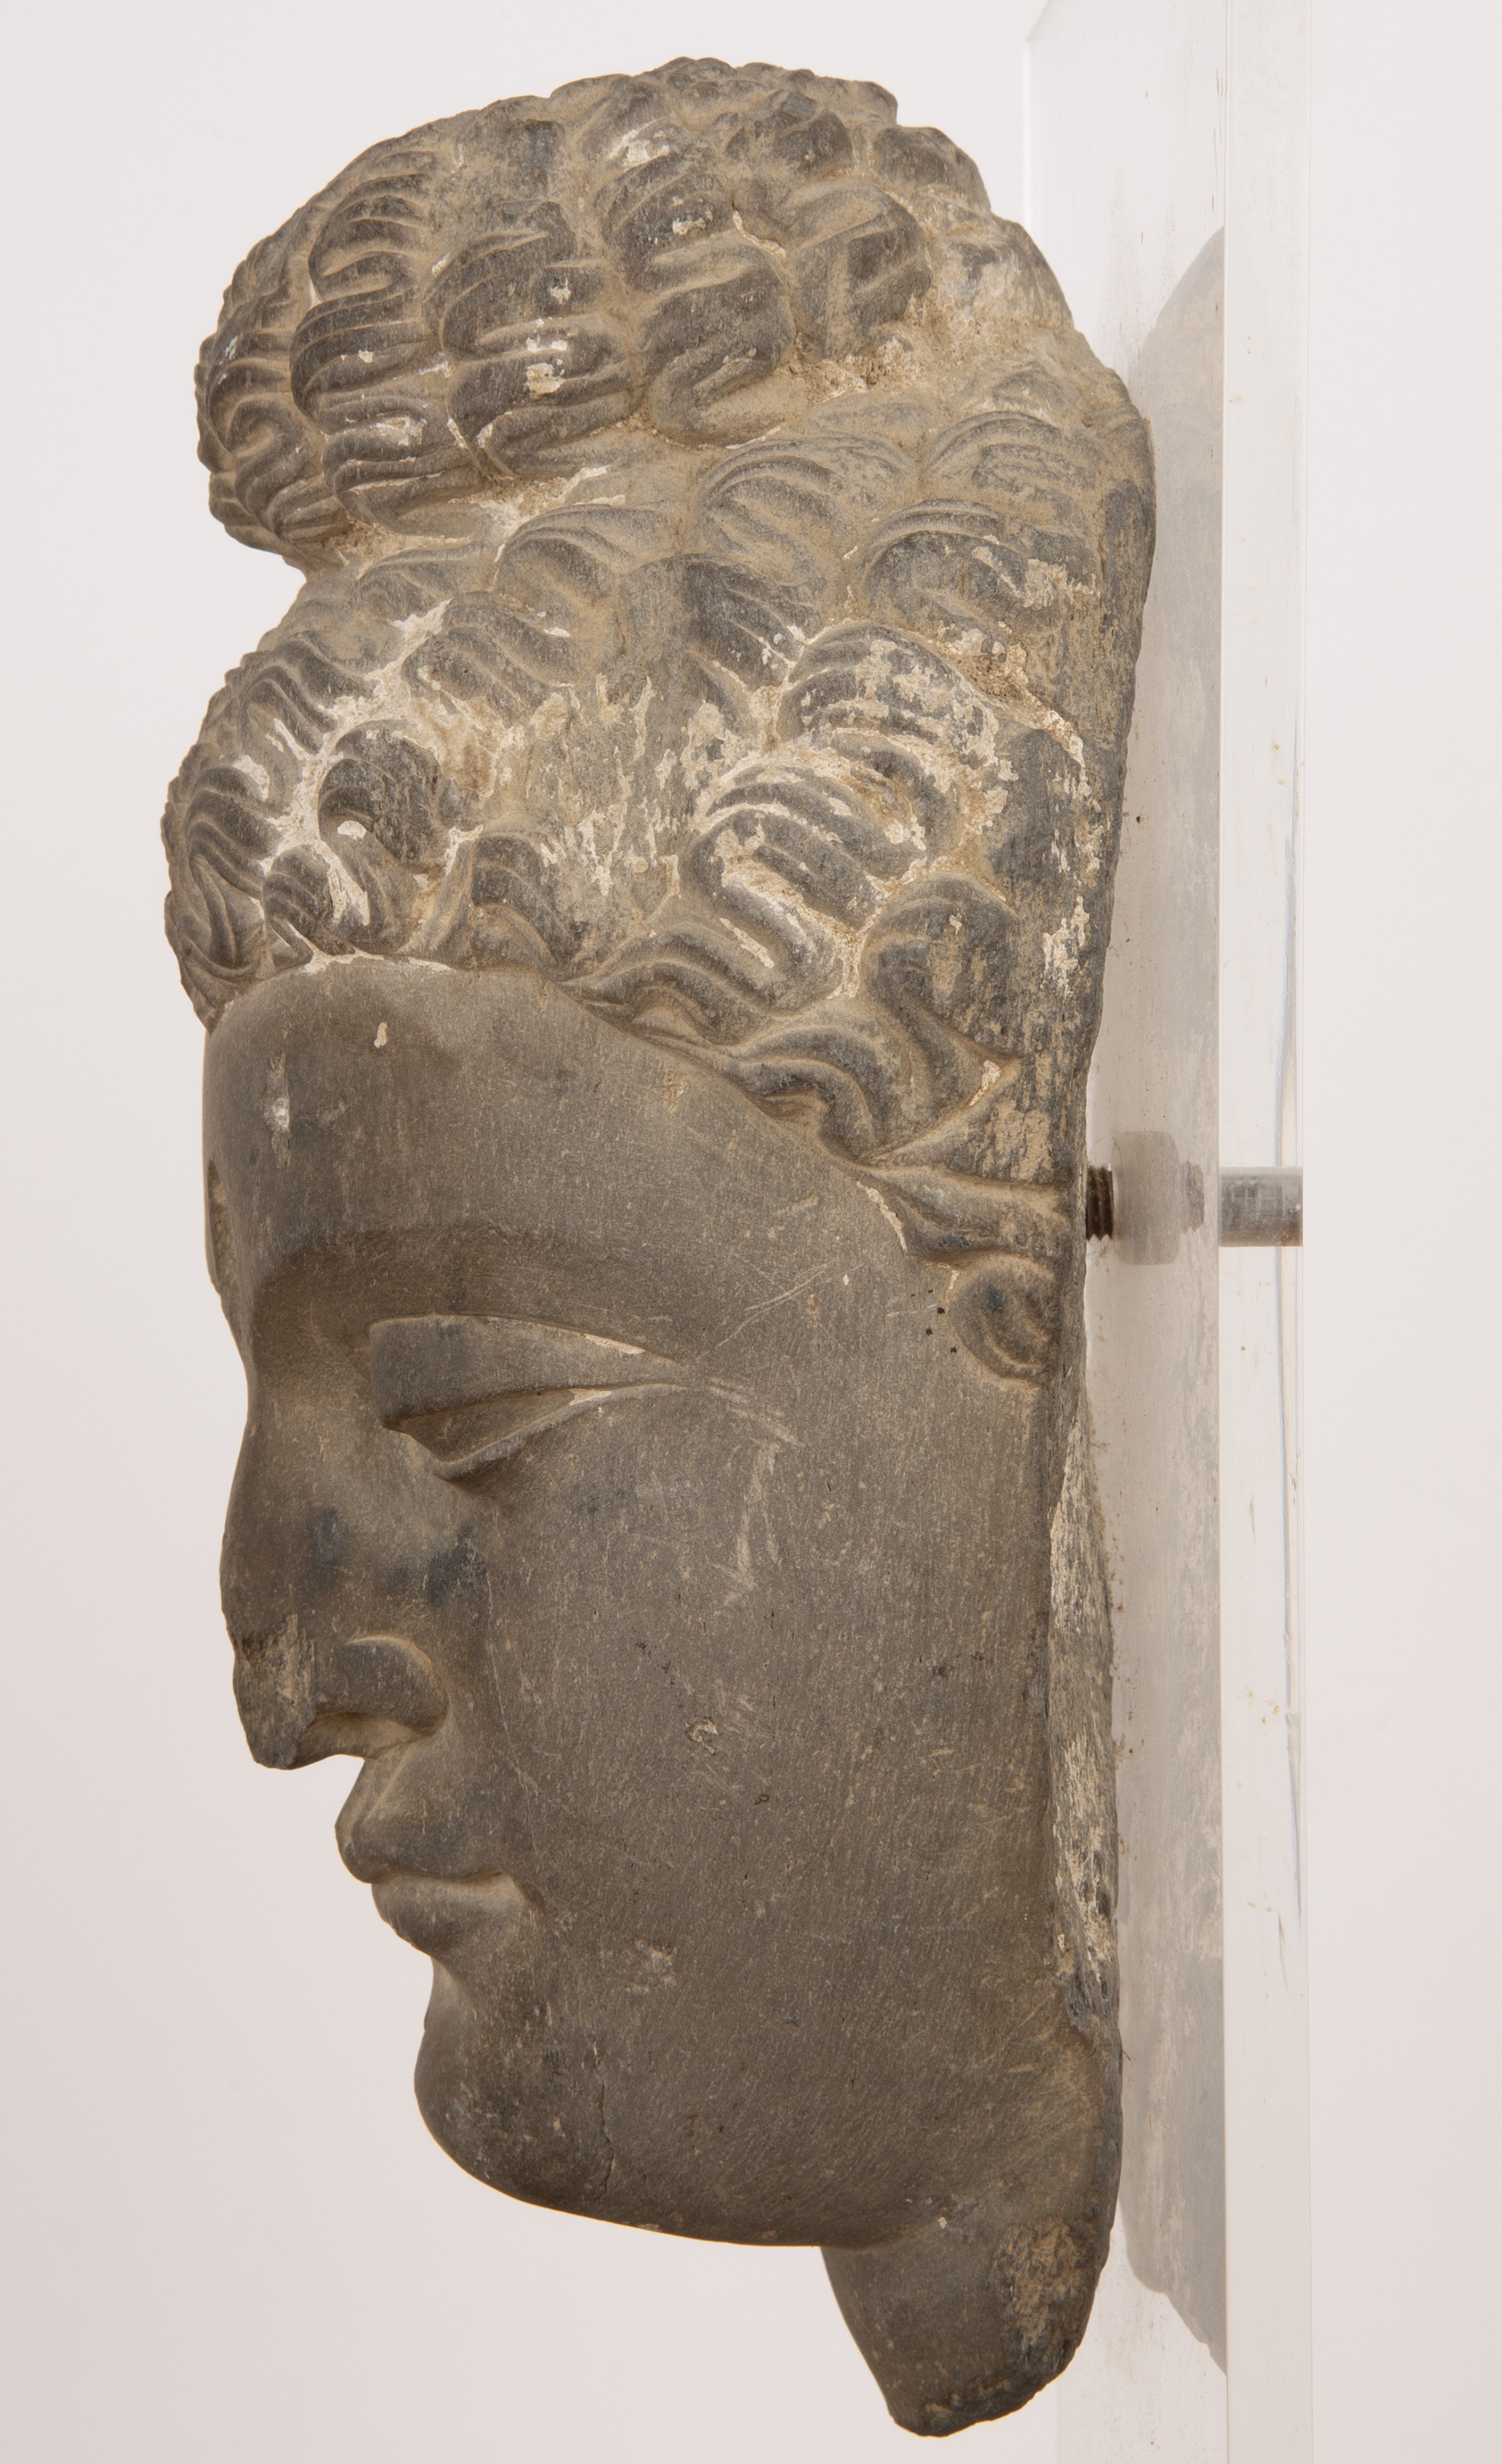 Fragmentary grey carved schist head of Buddha Indian, ancient region of Gandhara, 3rd-4th Century - Image 5 of 9